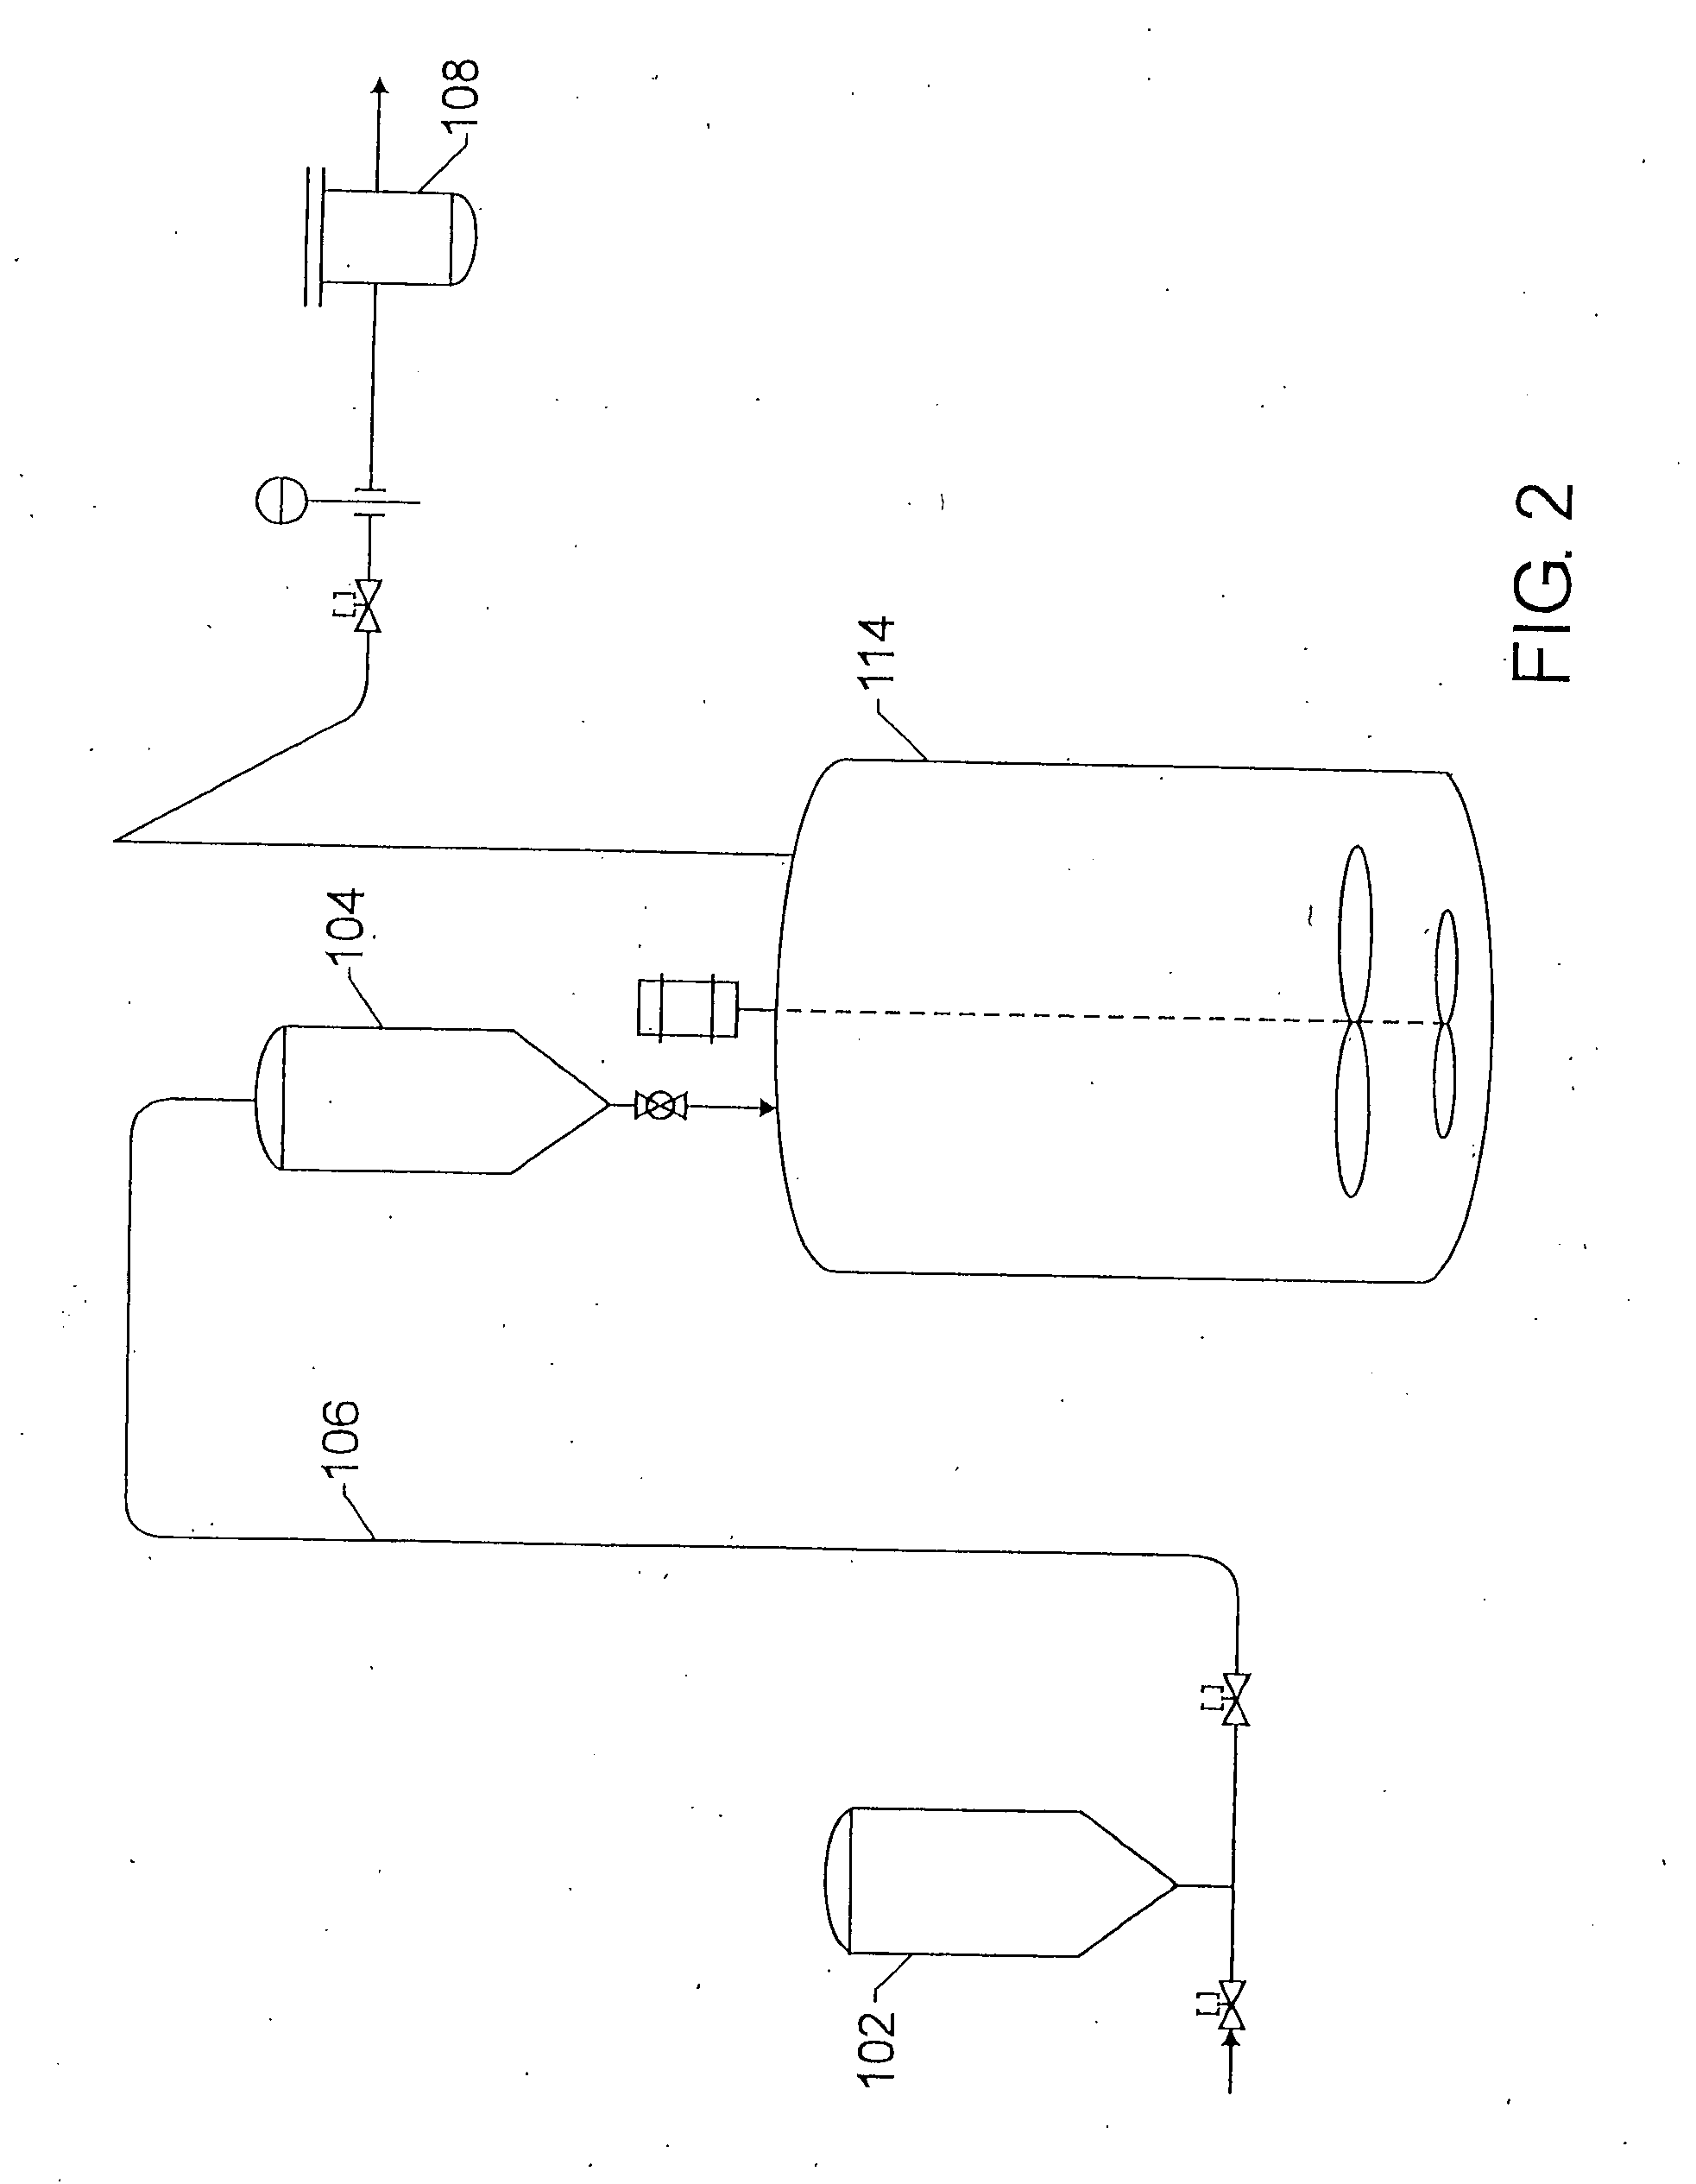 Catalyst slurry feeding assembly for a polymerization reactor